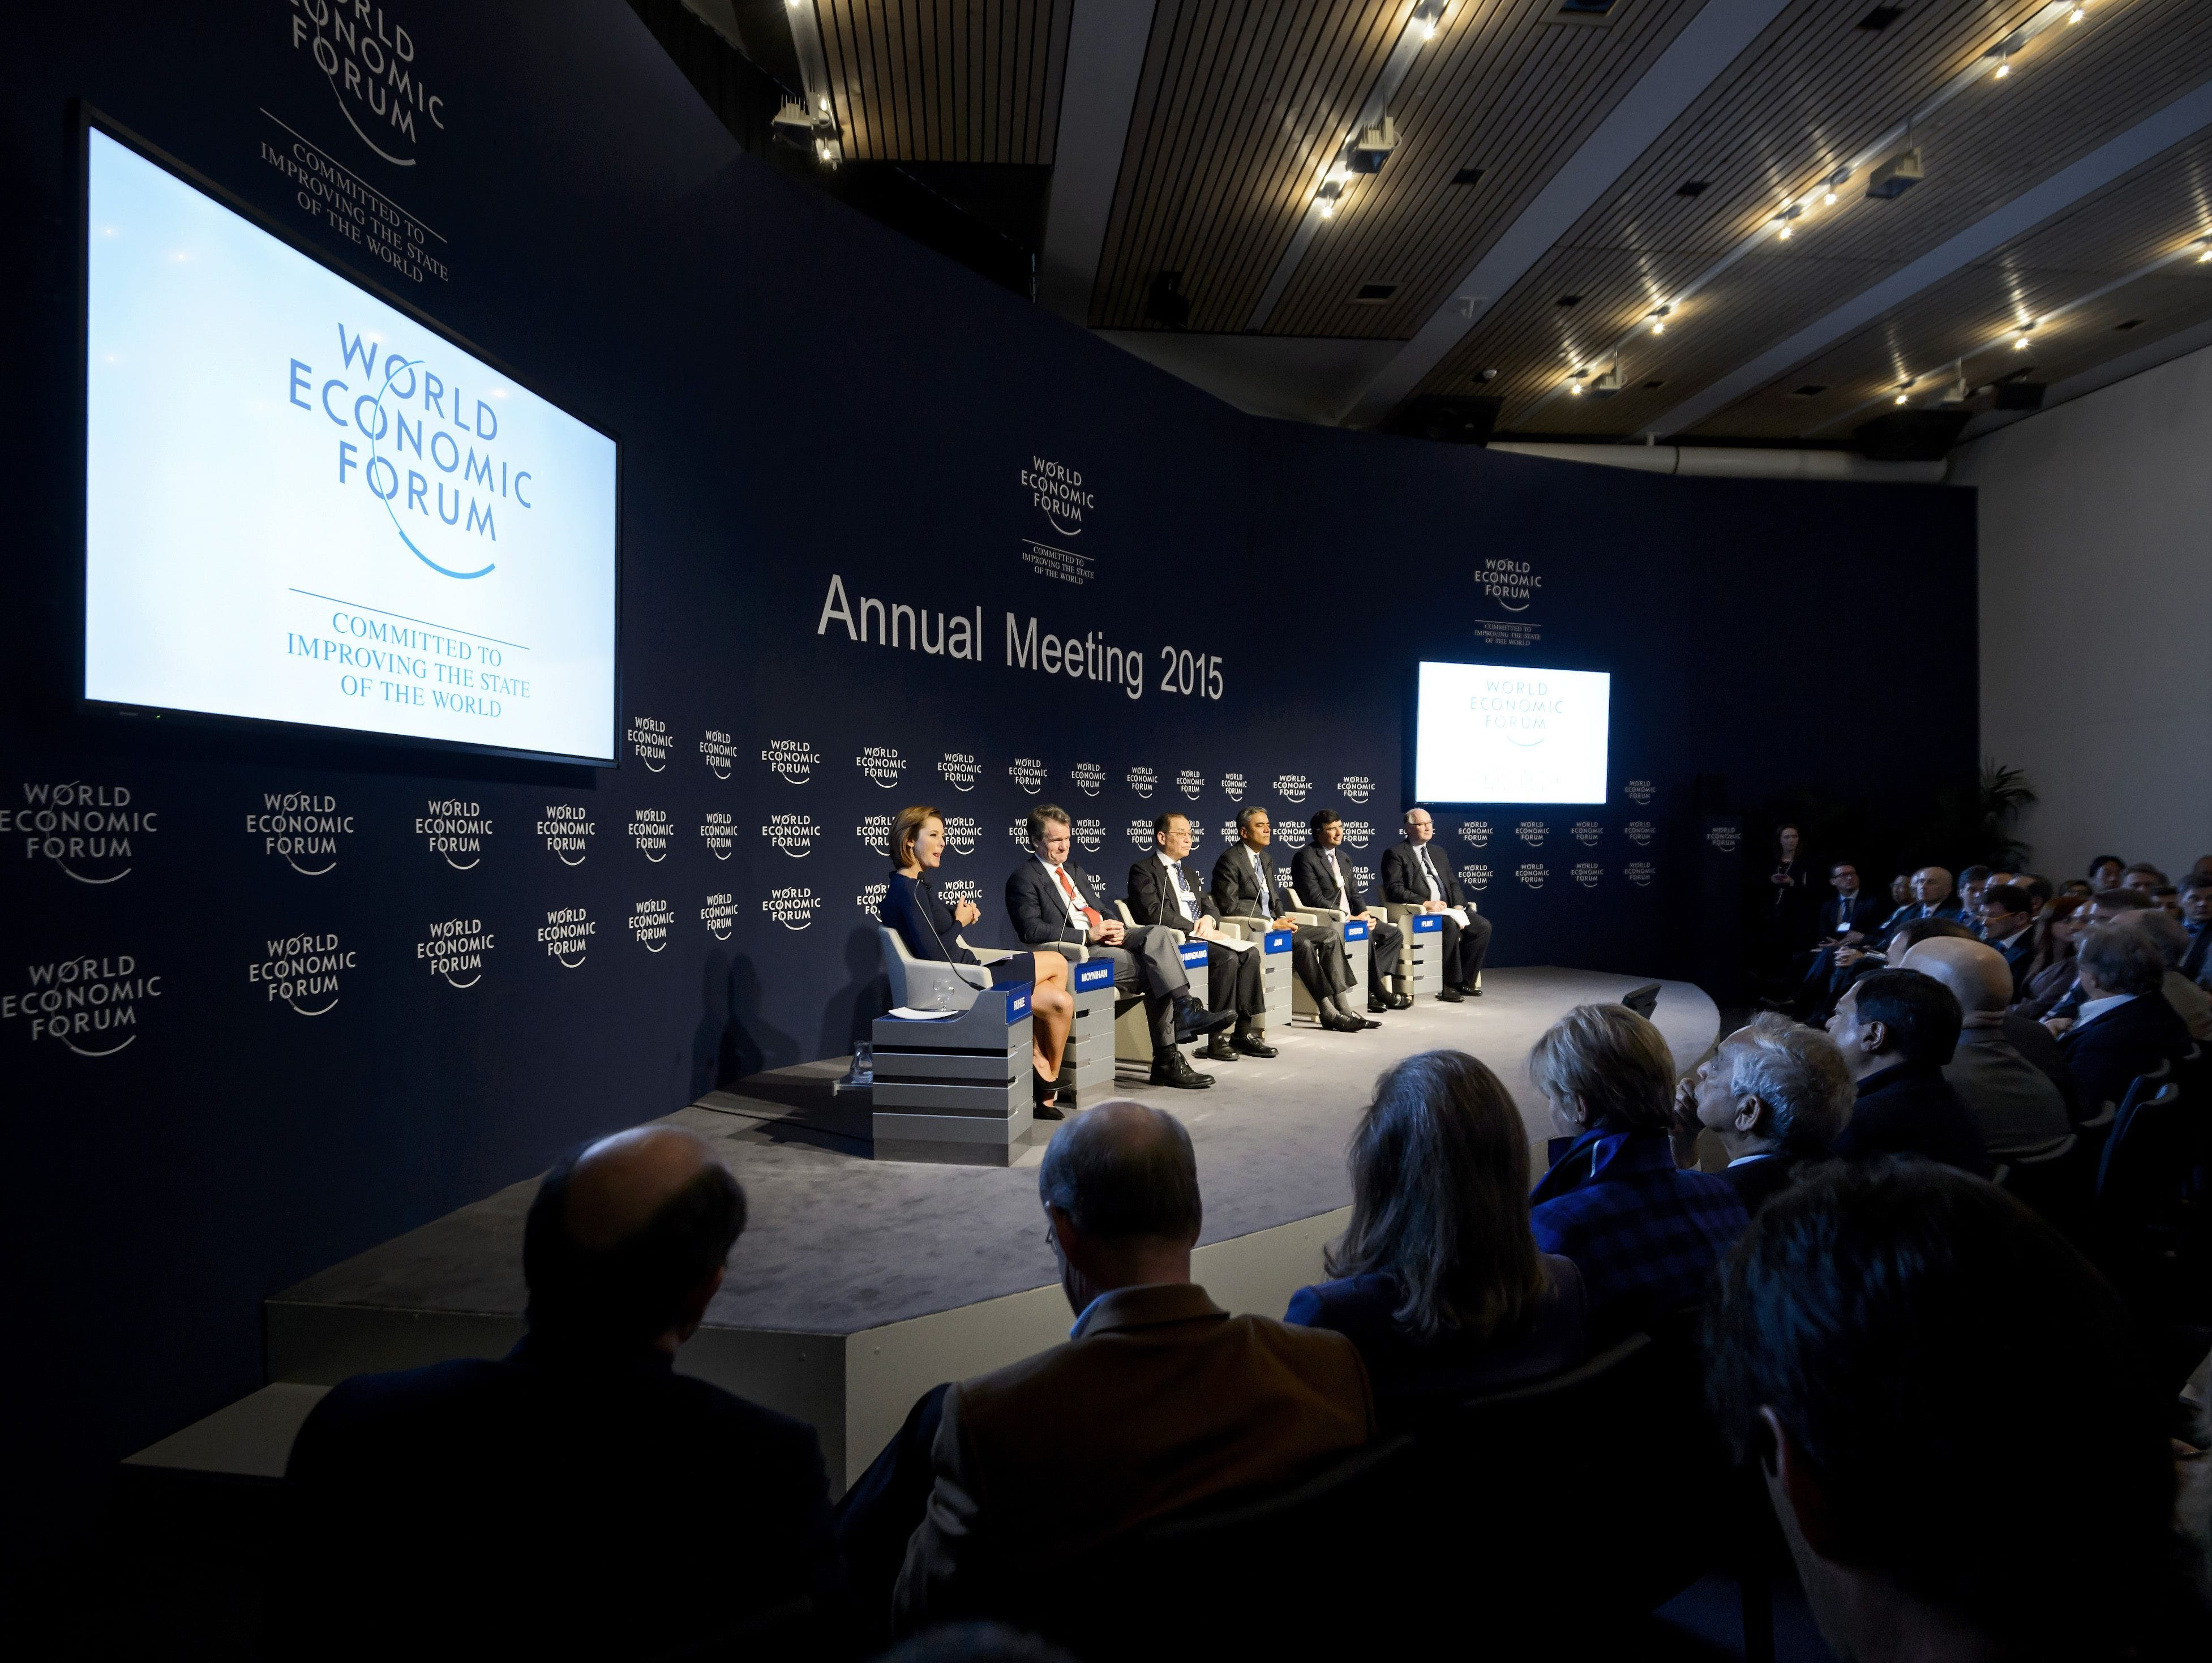 Participants attend a discussion at the World Economic Forum annual meeting on Wednesday in Davos.